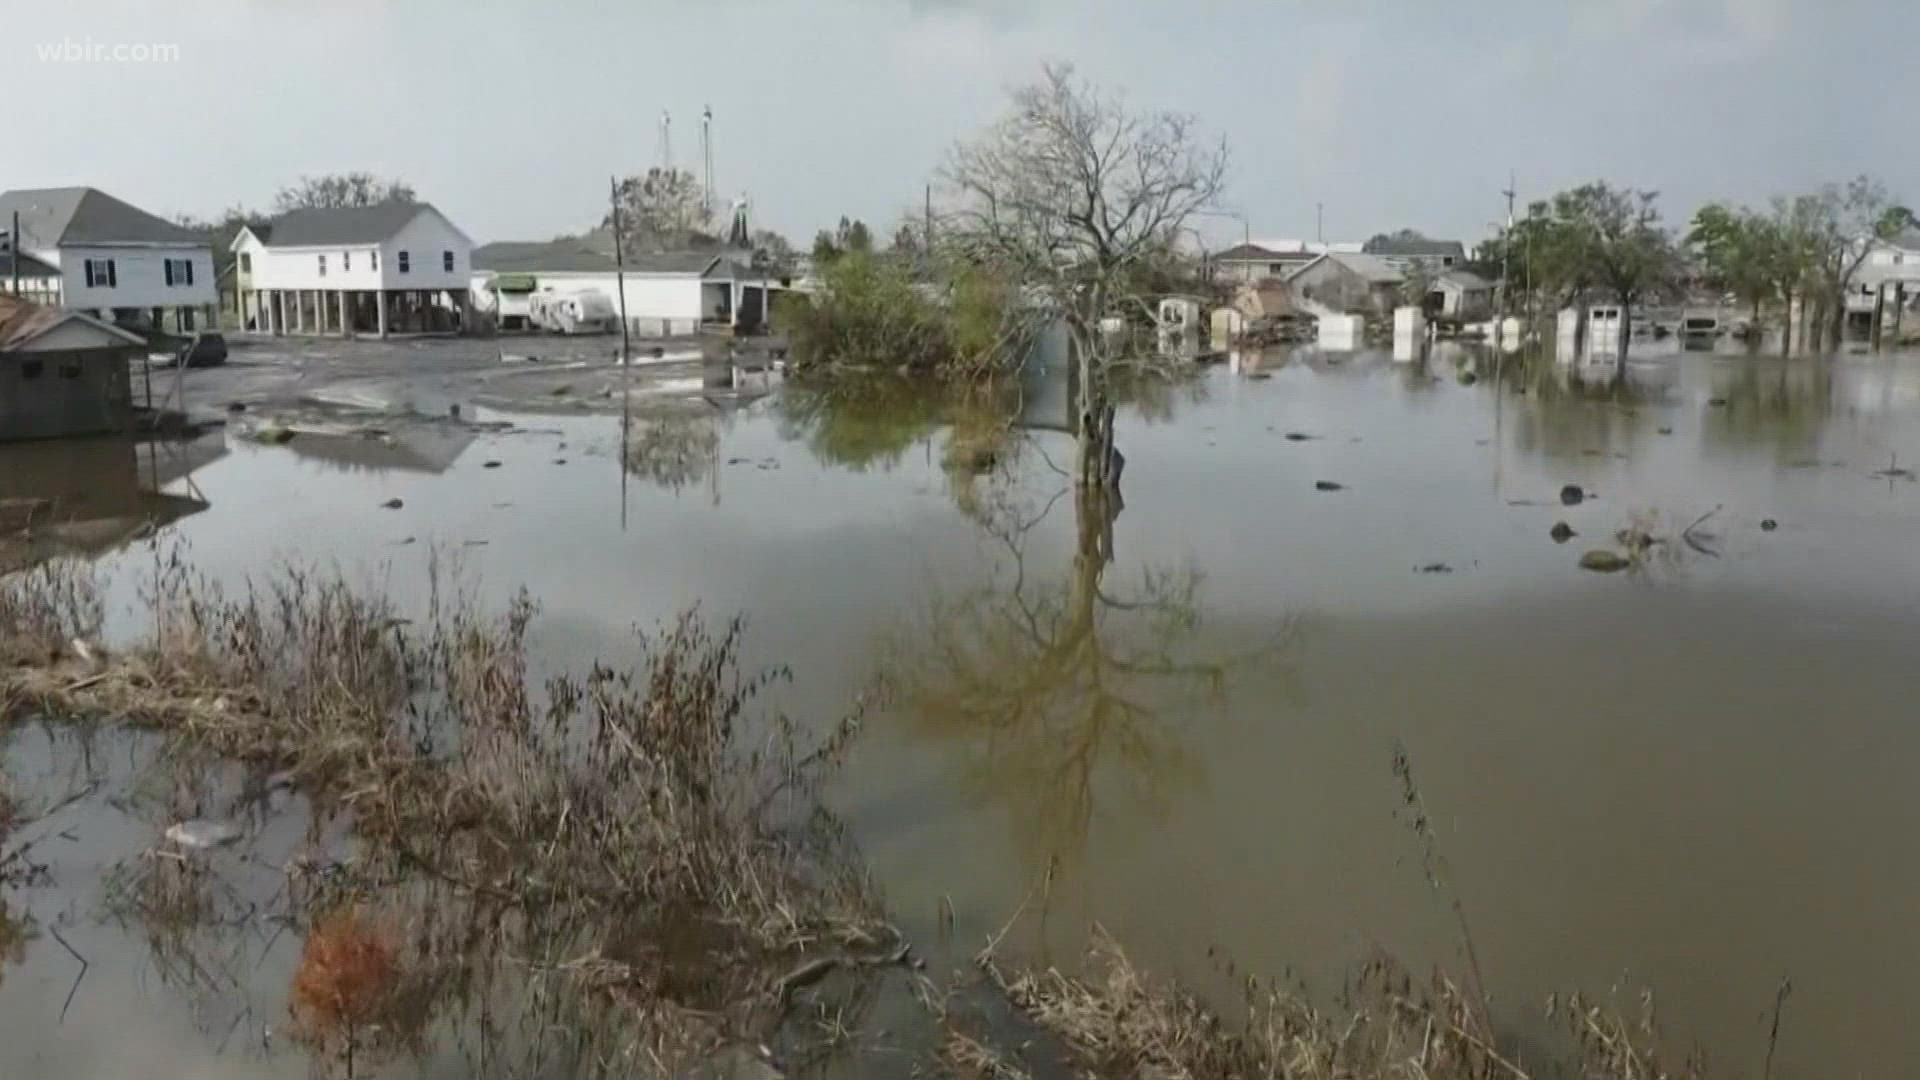 Parts of the state are still flooded as many are still unable to access their homes